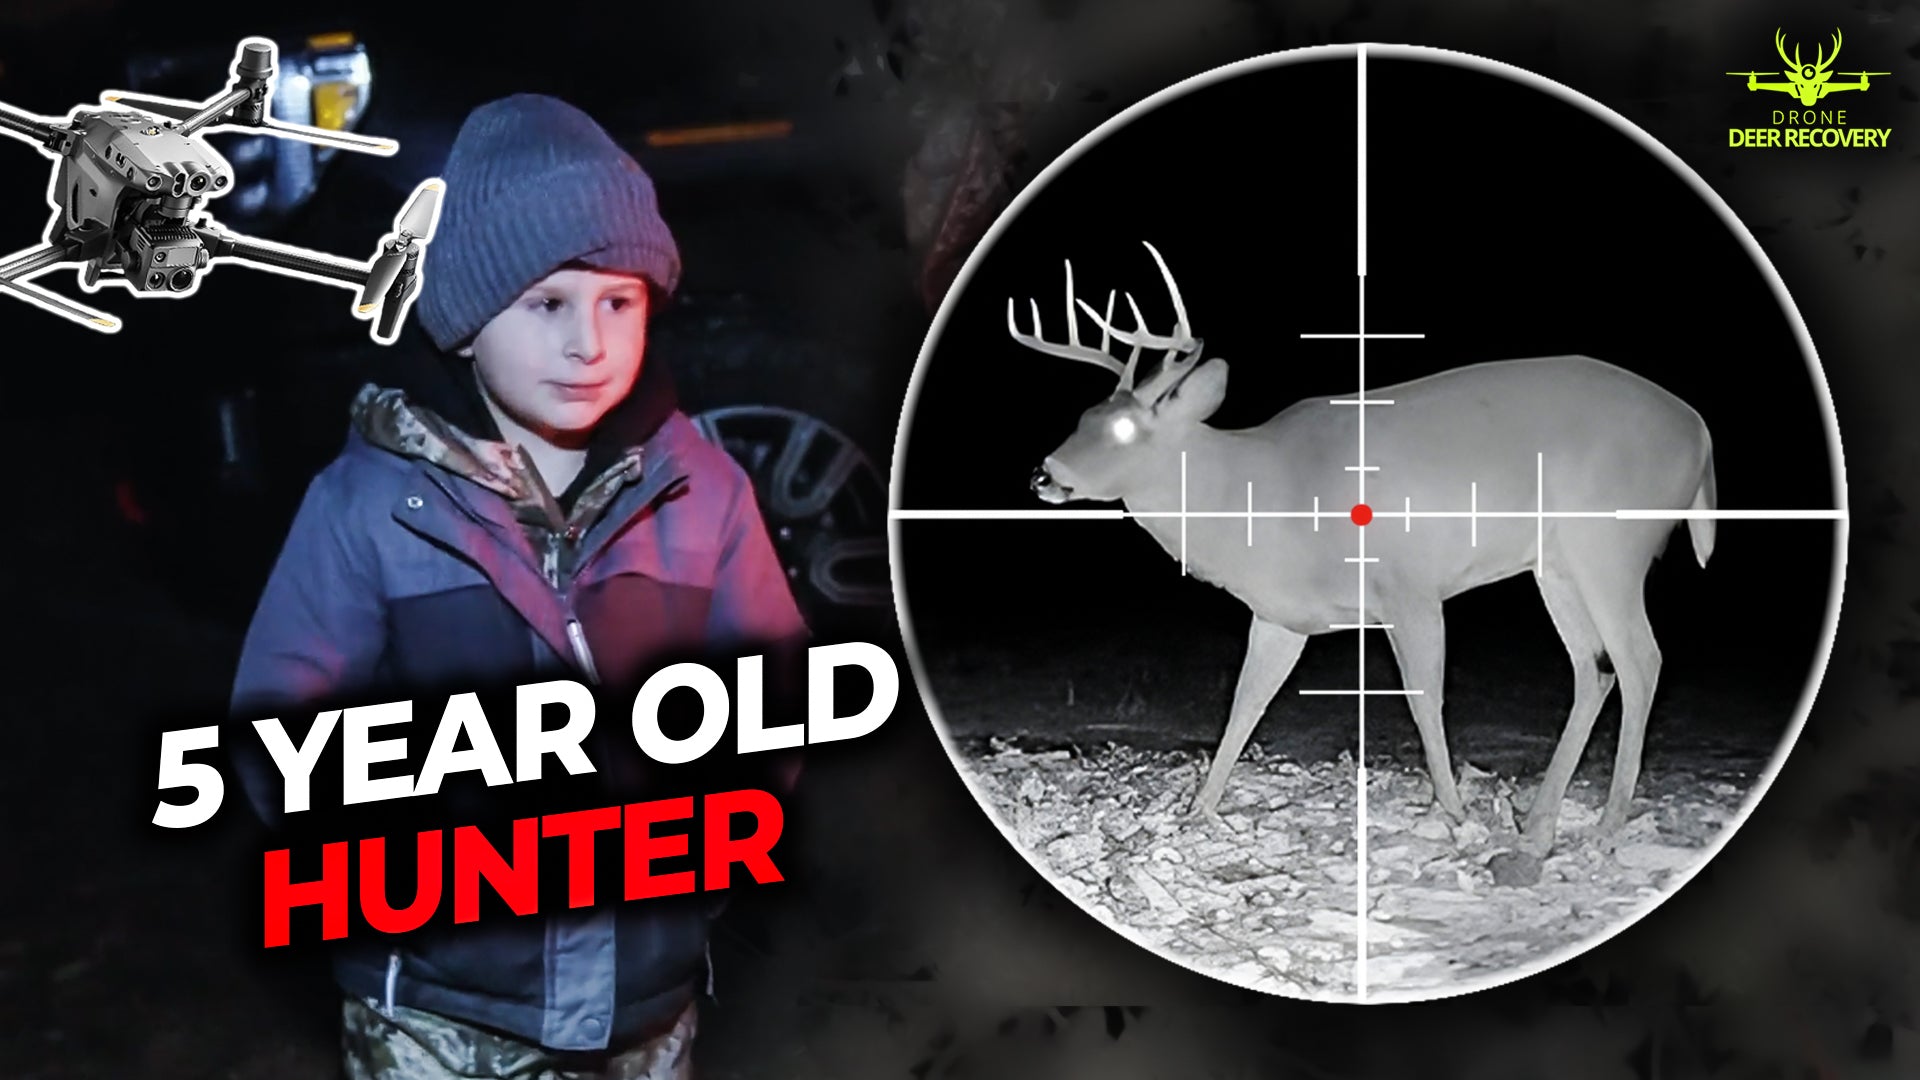 Drone Finds Buck That Was Shot by Five Year Old Hunter